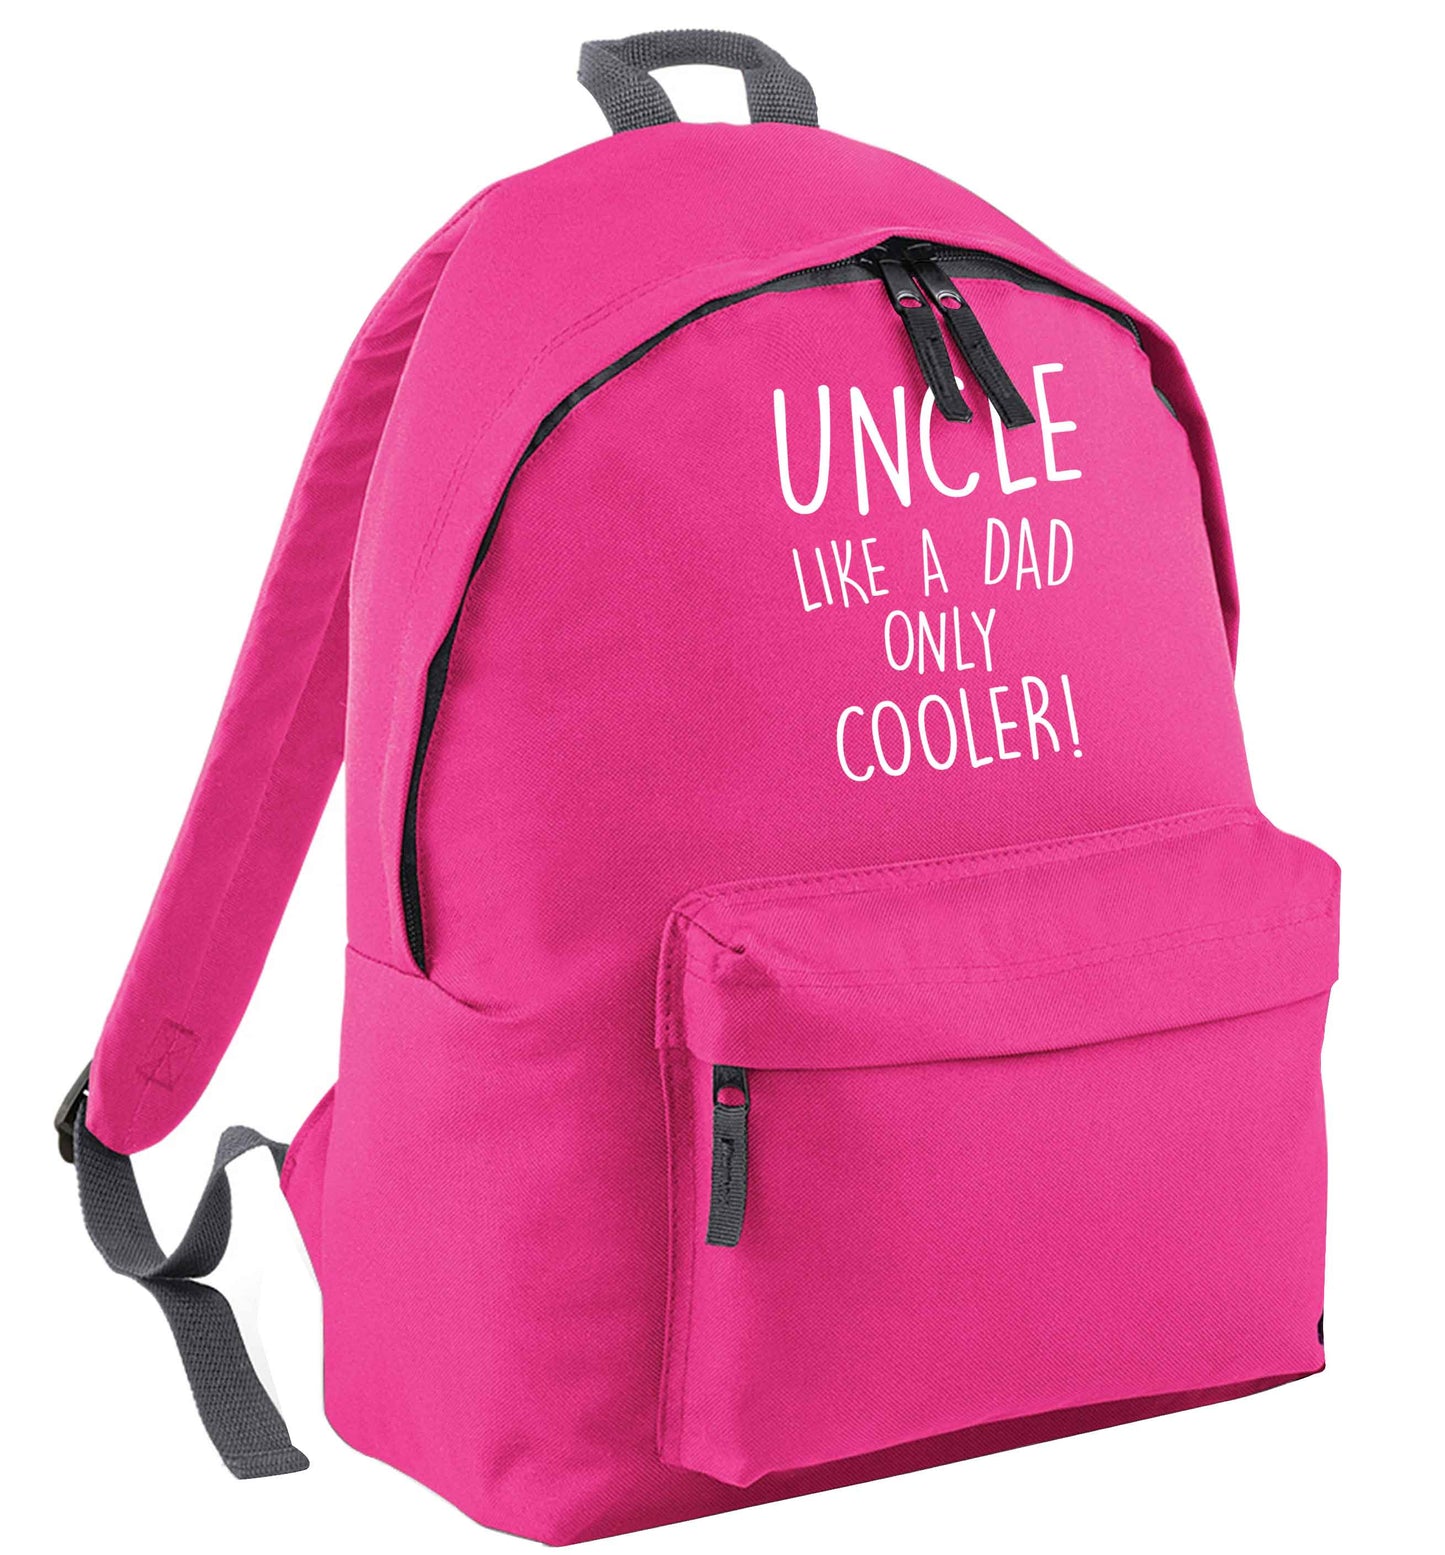 Uncle like a dad only cooler | Children's backpack